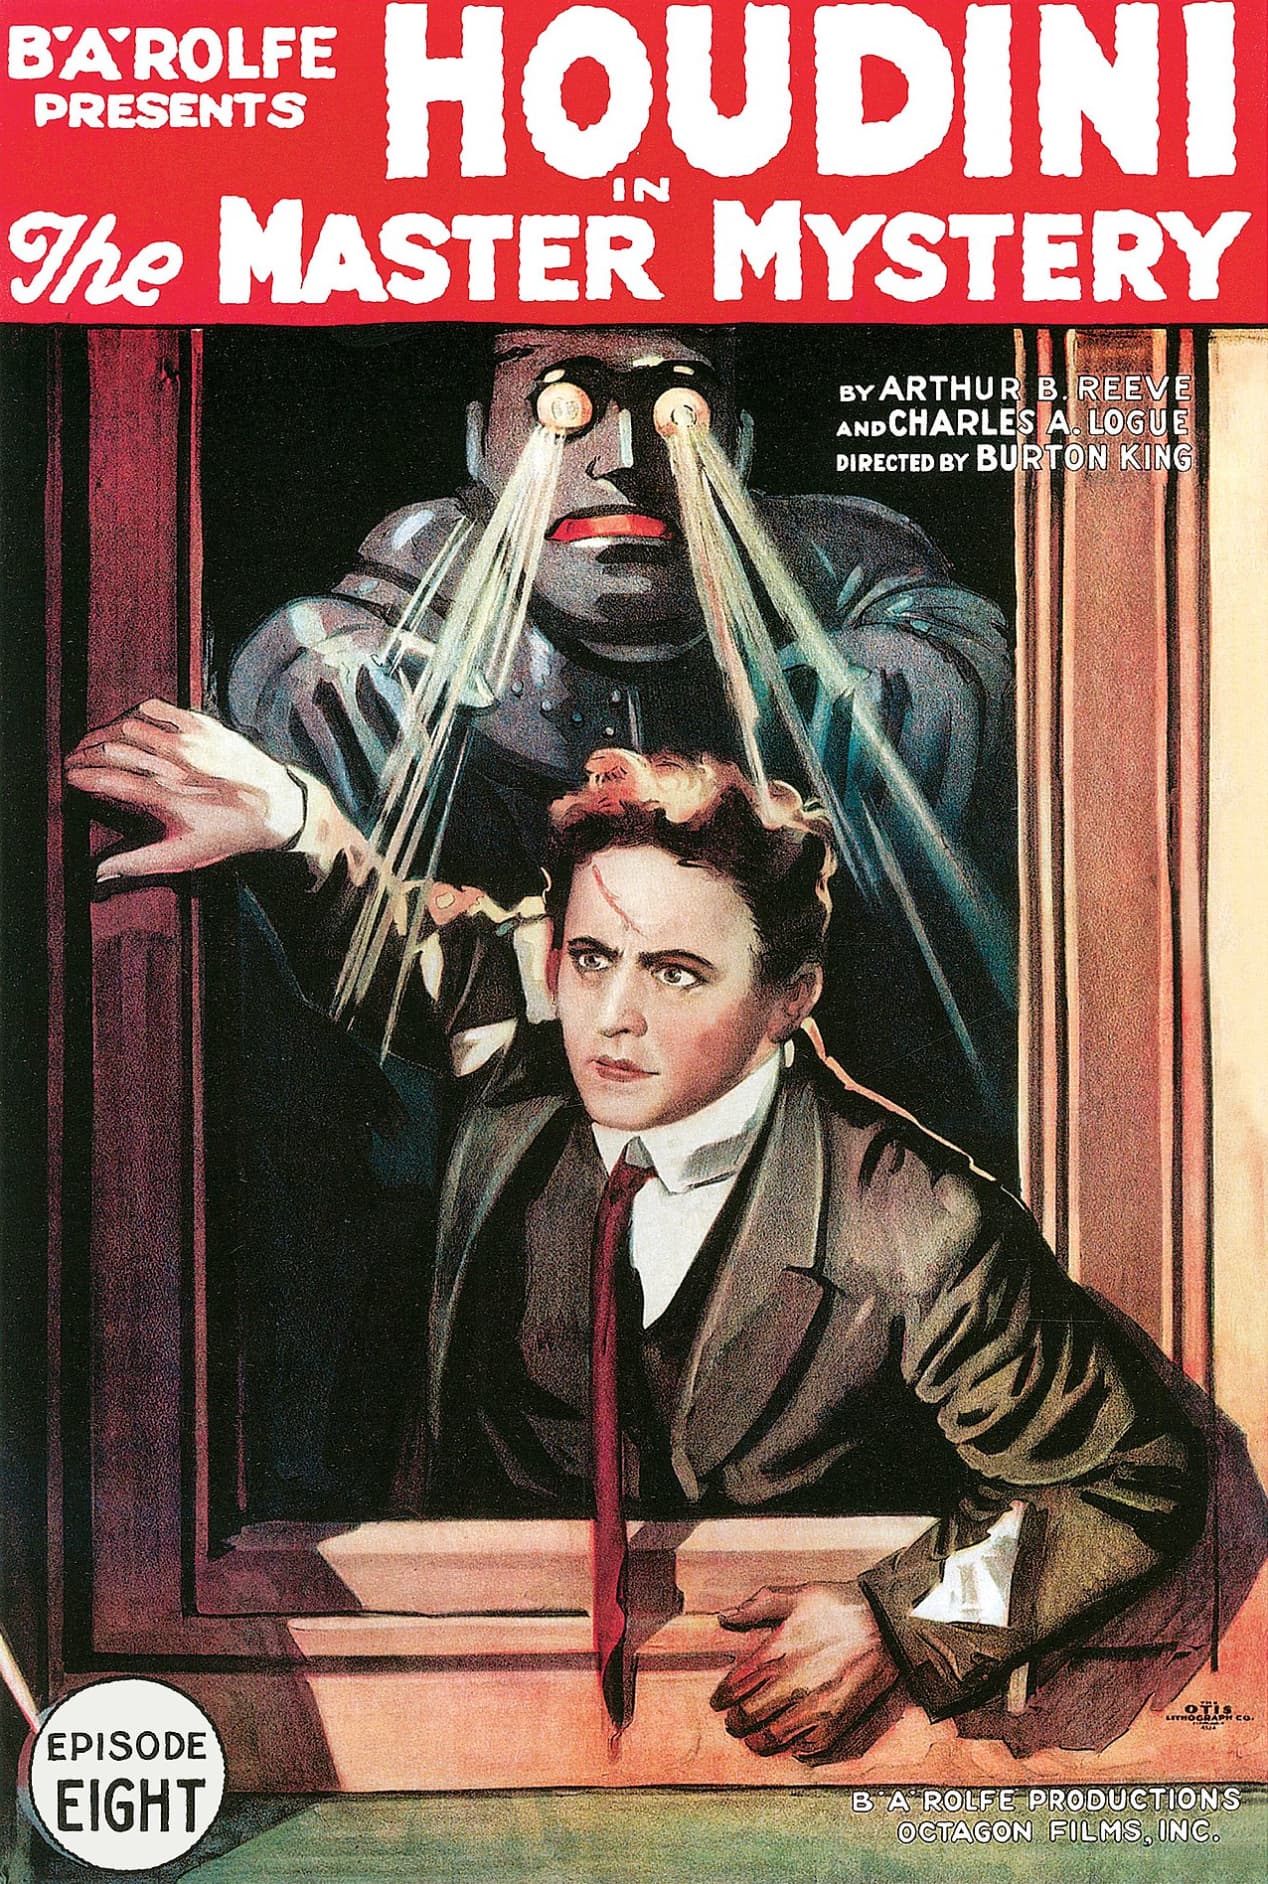 harry houdini posters - B'A Rolfe Presents Houdini The Master Mystery By Arthur Breeve Andcharles A Logue Directed By Burton King Episode Eight Larolle Productions Octagon Films, Inc.